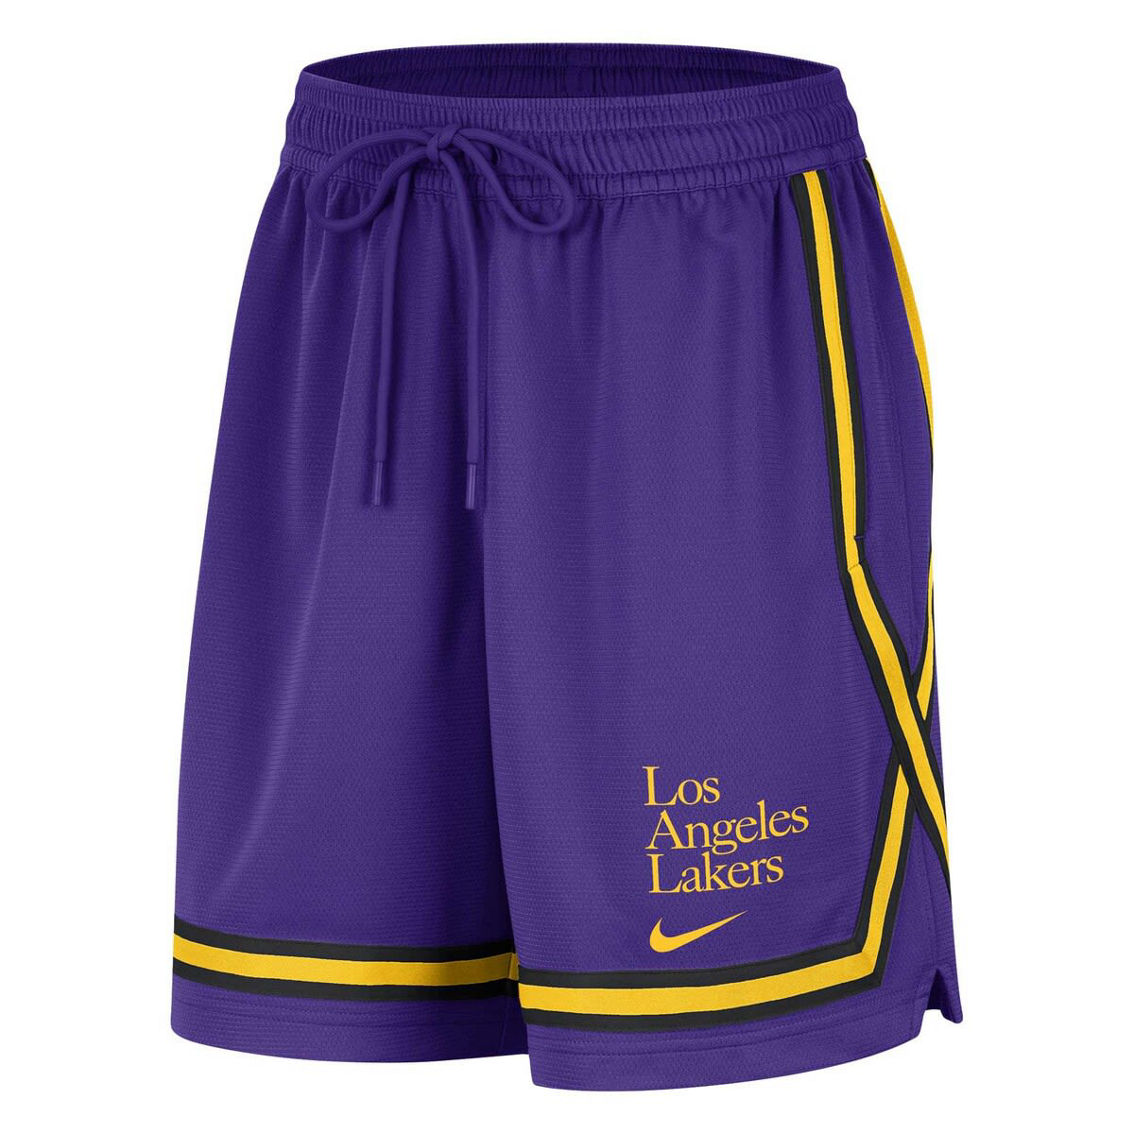 Nike Women's Purple Los Angeles Lakers Authentic Crossover Fly Performance Shorts - Image 3 of 4